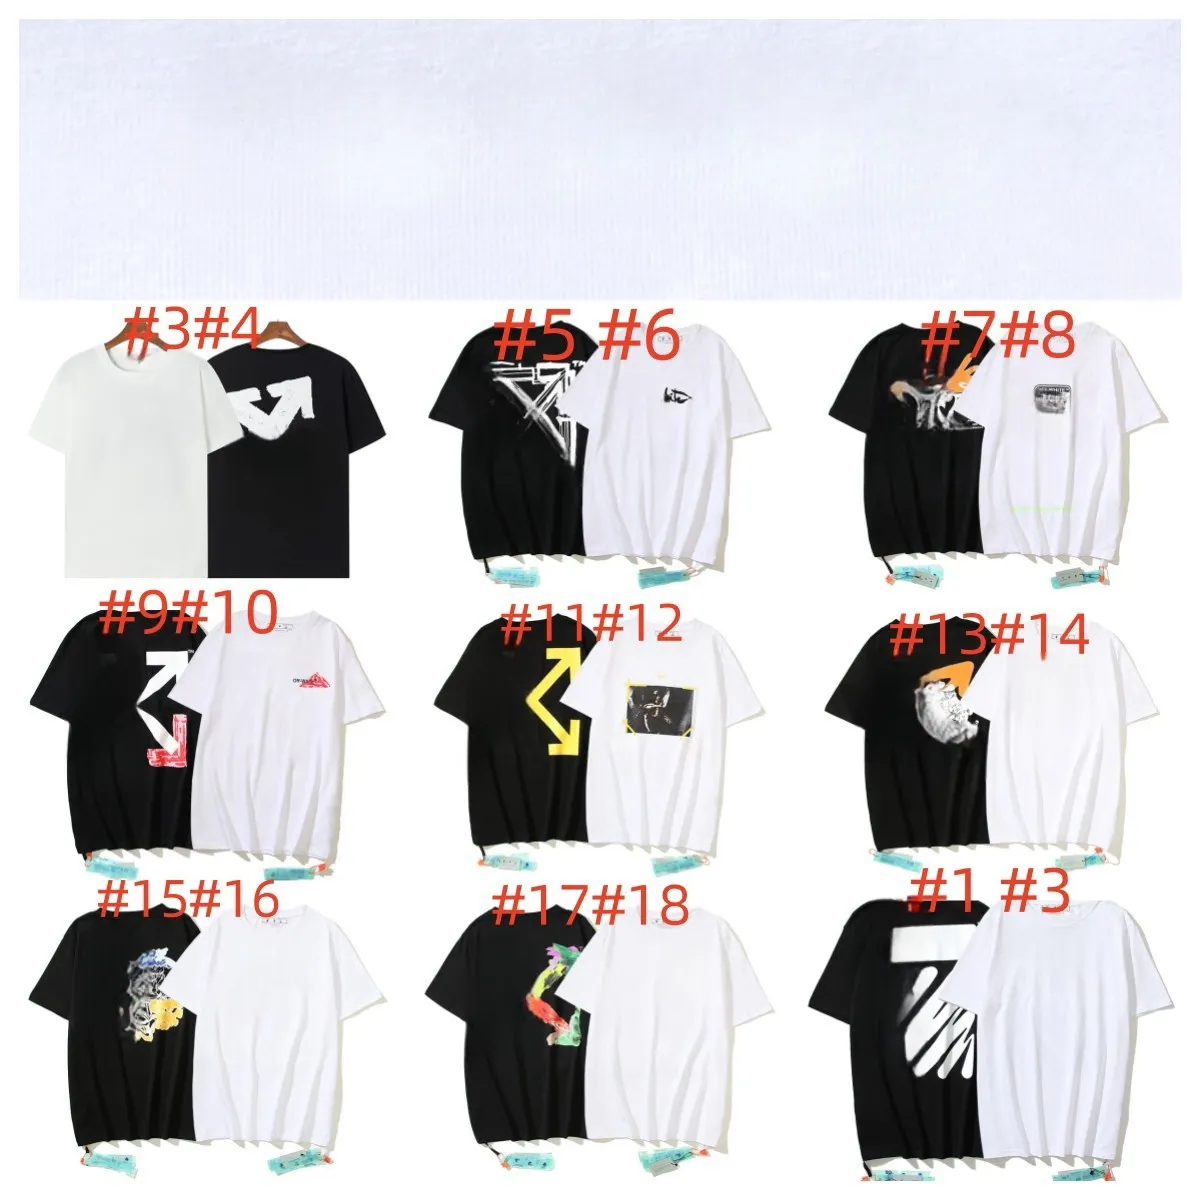 W181107Dupe tees Shirts Mens Womens T Shirts Cotton Crew Neck Tee Graphic Short Sleeve